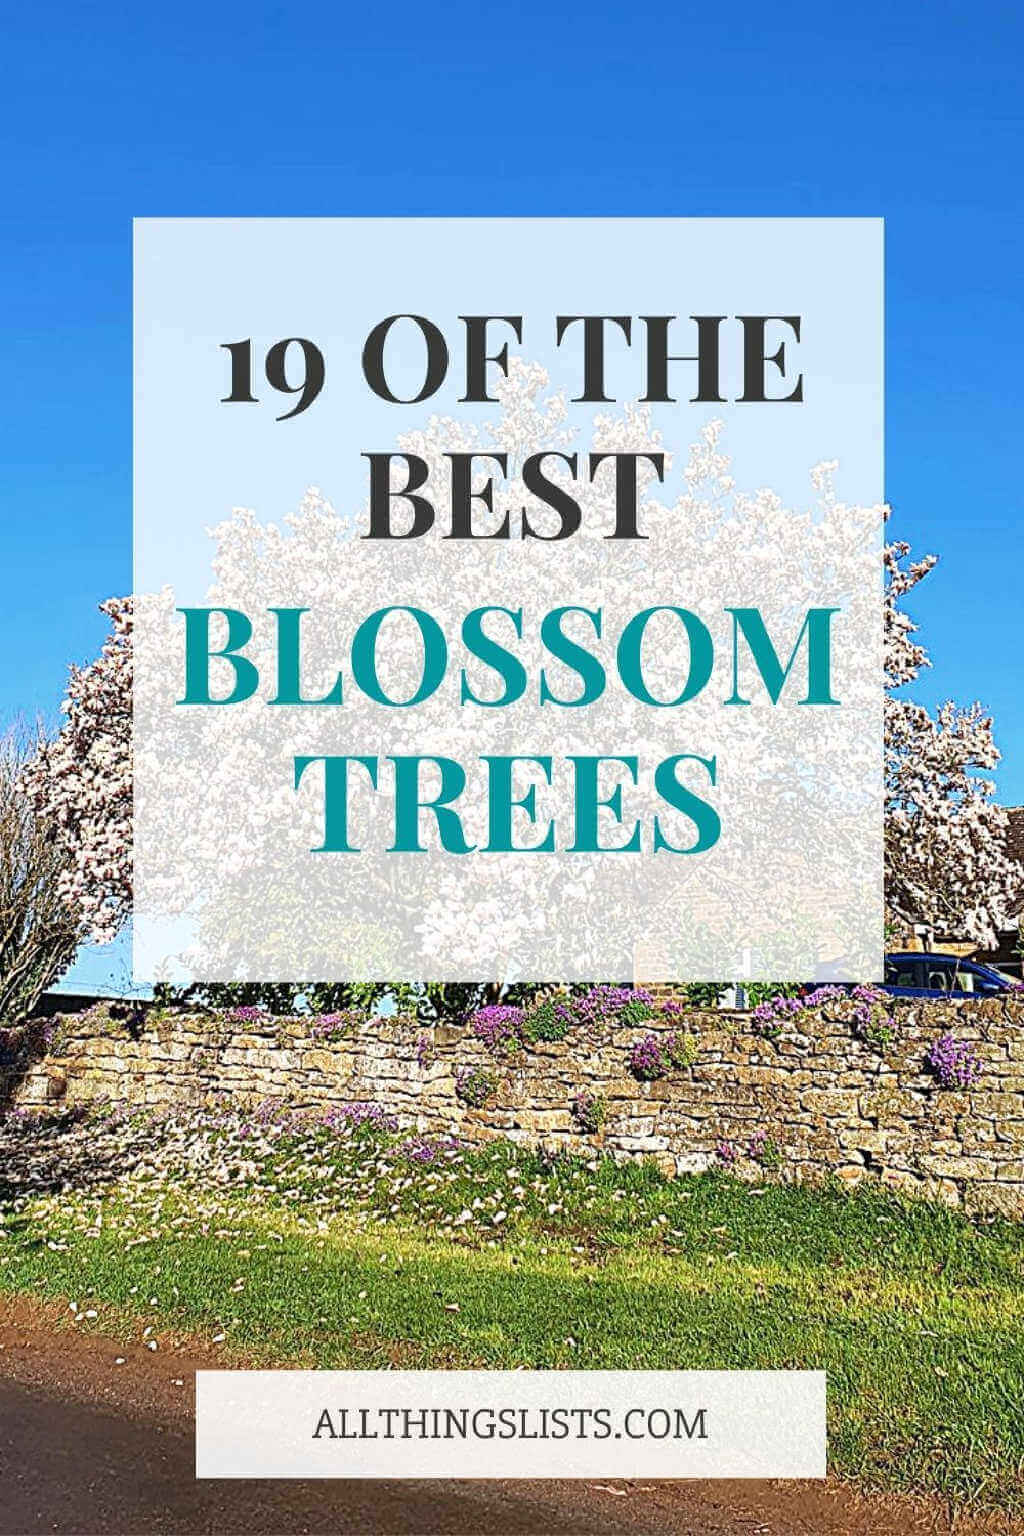 18 of the best blossom trees